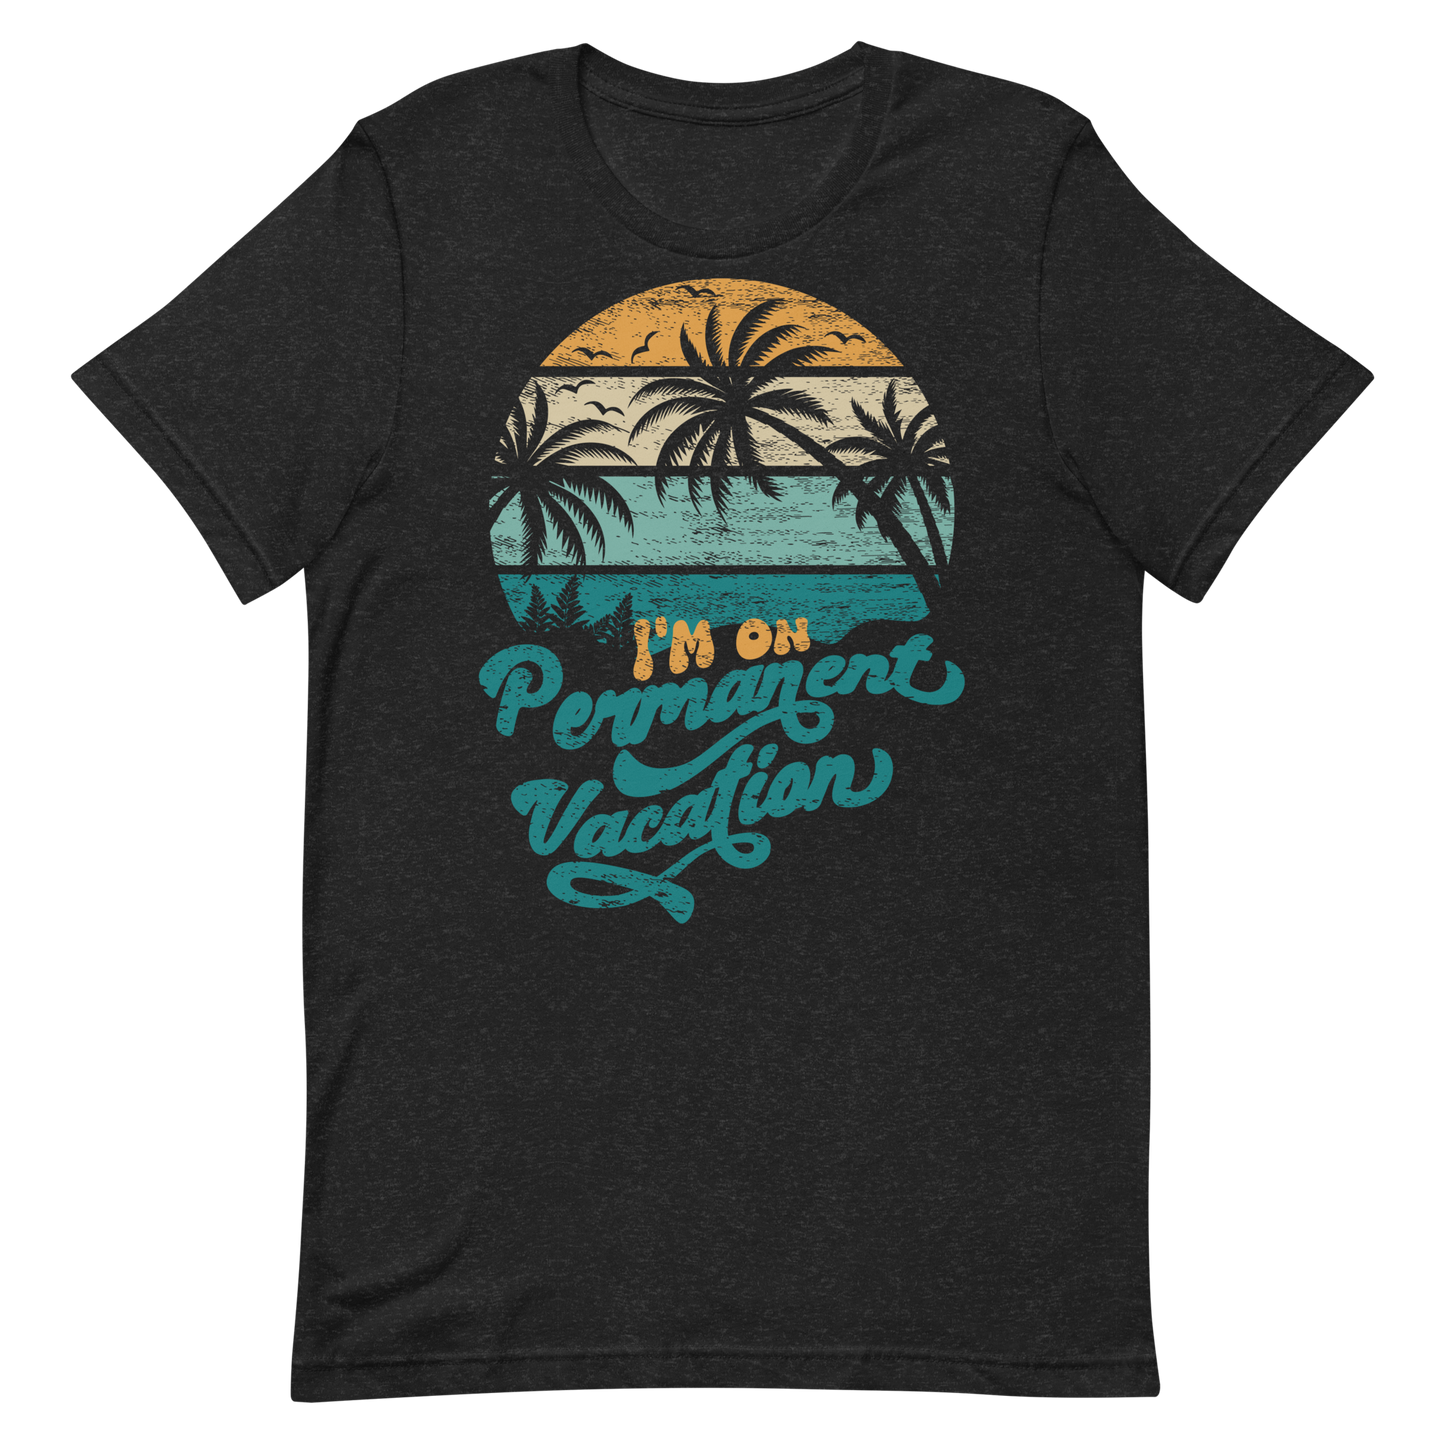 Retro Unisex T-Shirt - Palm Trees With a Retirement Quote Black Heather